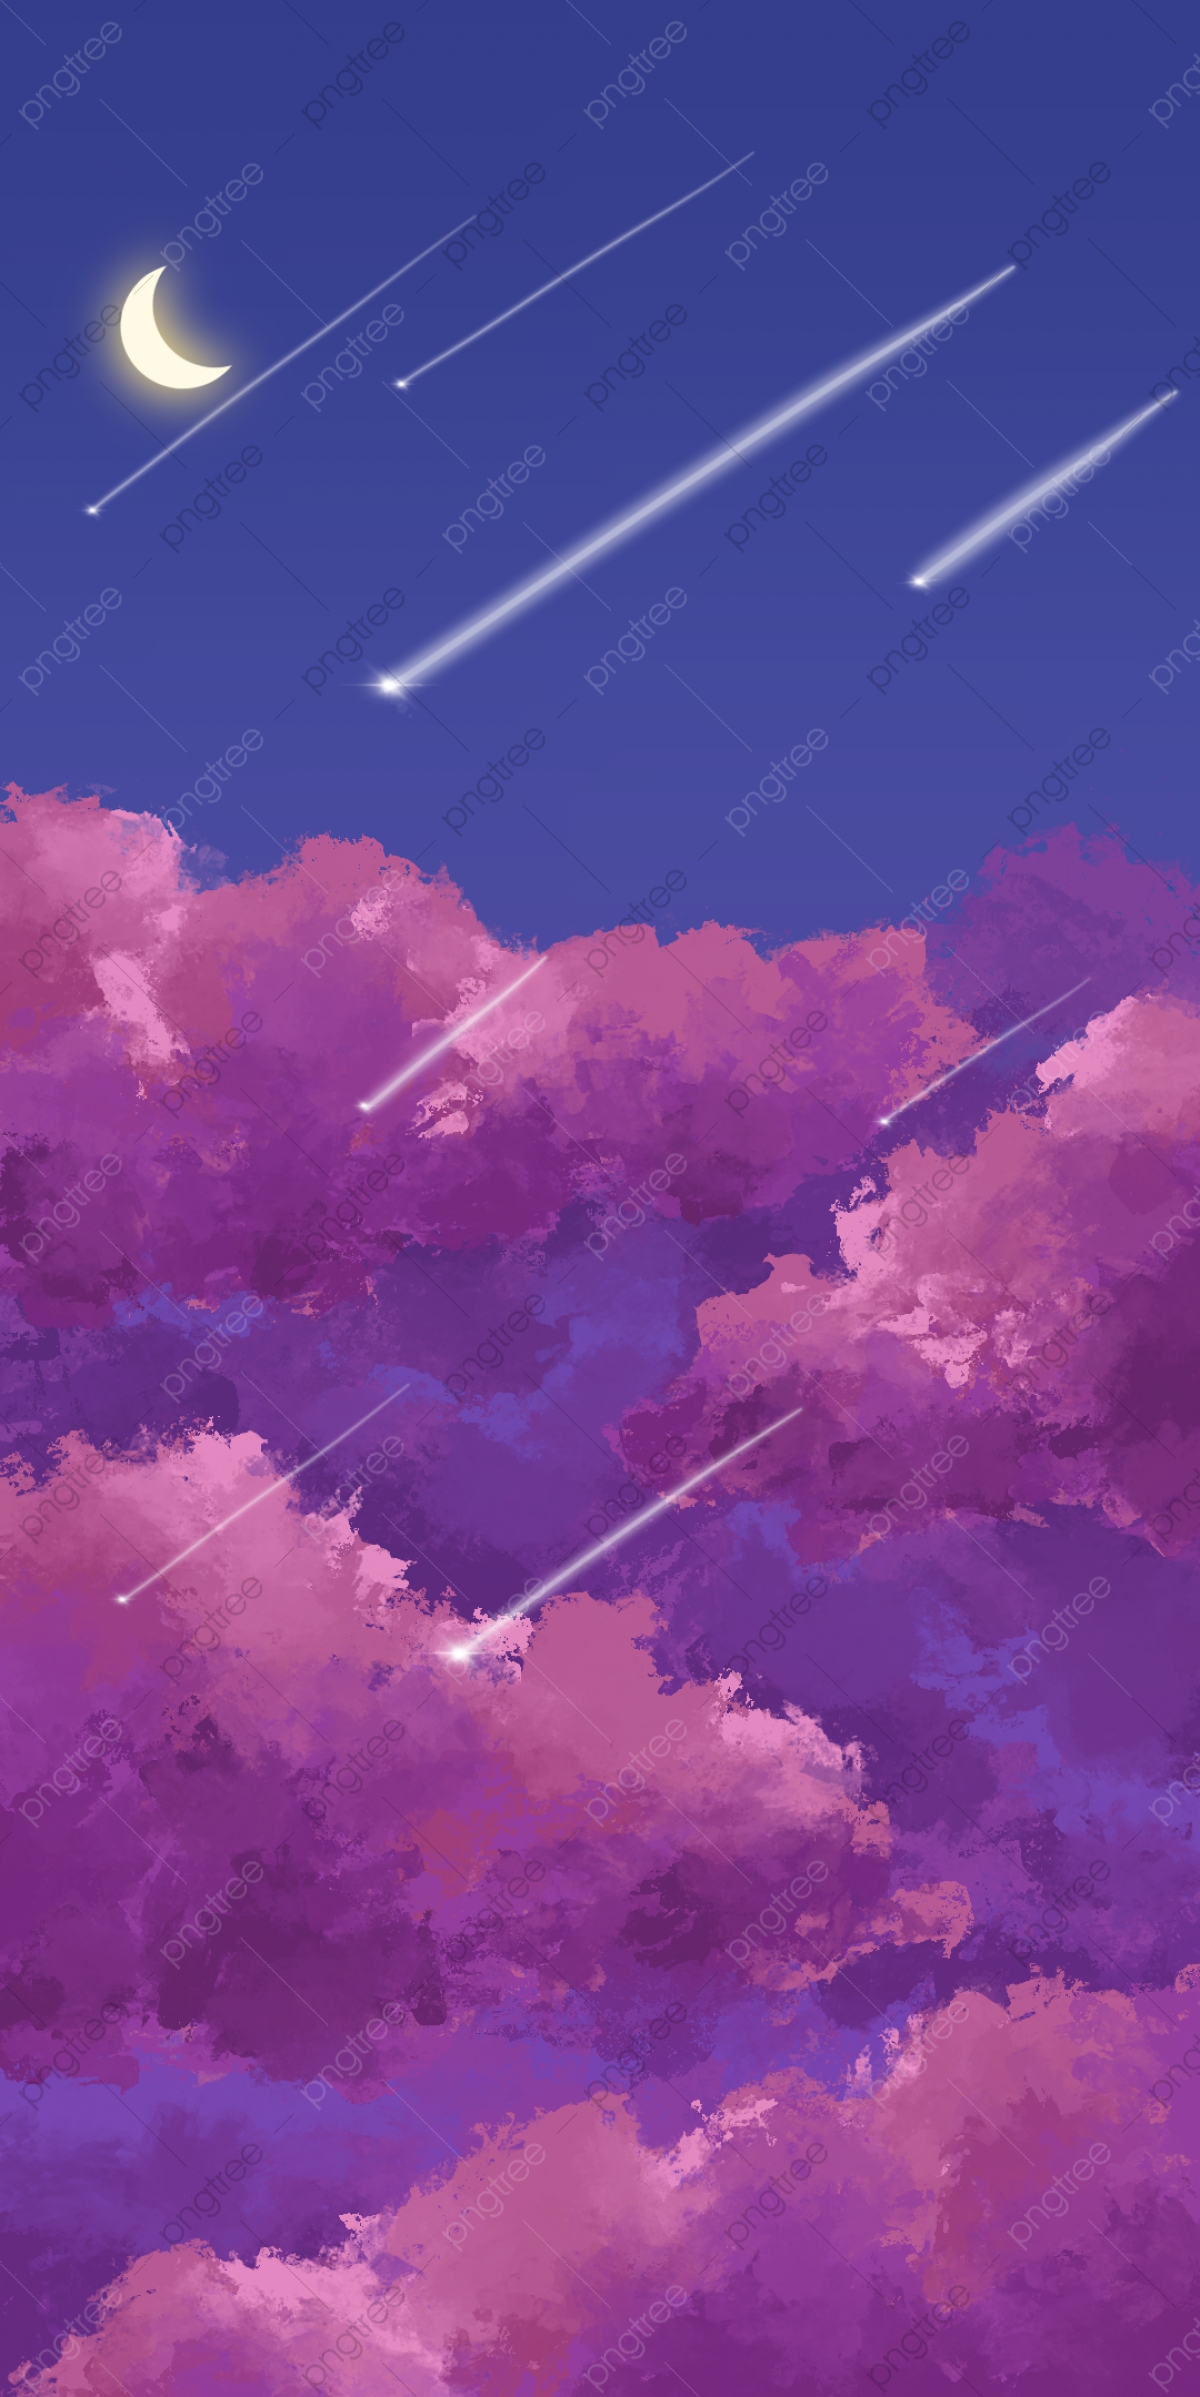 Beautiful Night Sky Meteor Moon Cloud Mobile Wallpaper Background, Beautiful Night Sky Wallpaper, Night Sky Mobile Wallpaper, Beautiful Clouds Wallpaper Background Image for Free Download